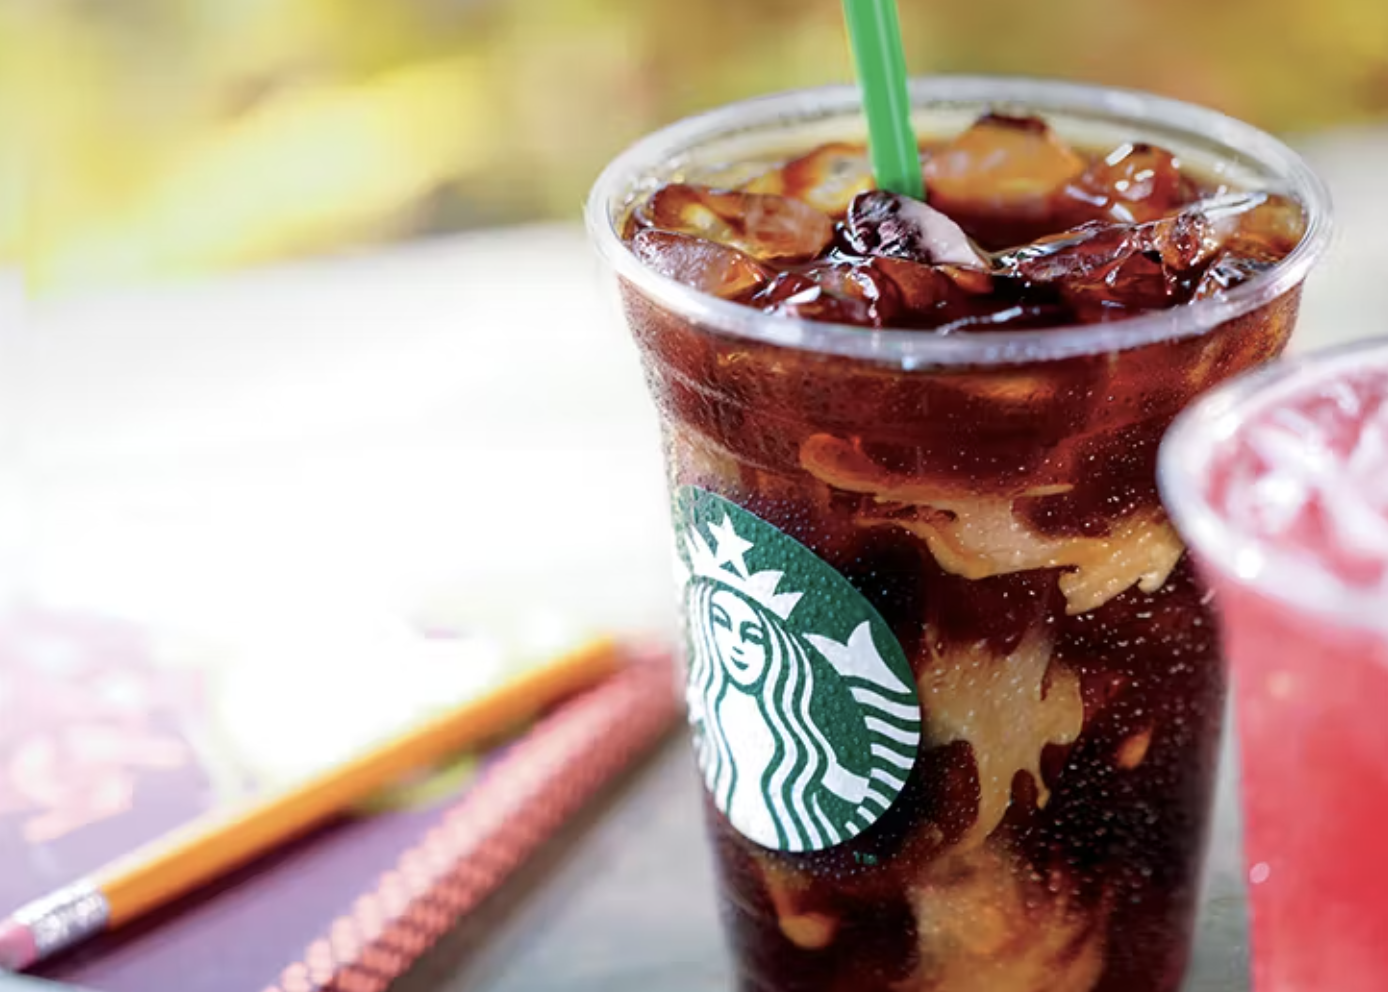 https://www.purewow.com/stories/sugar-free-drinks-at-starbucks/assets/1.png